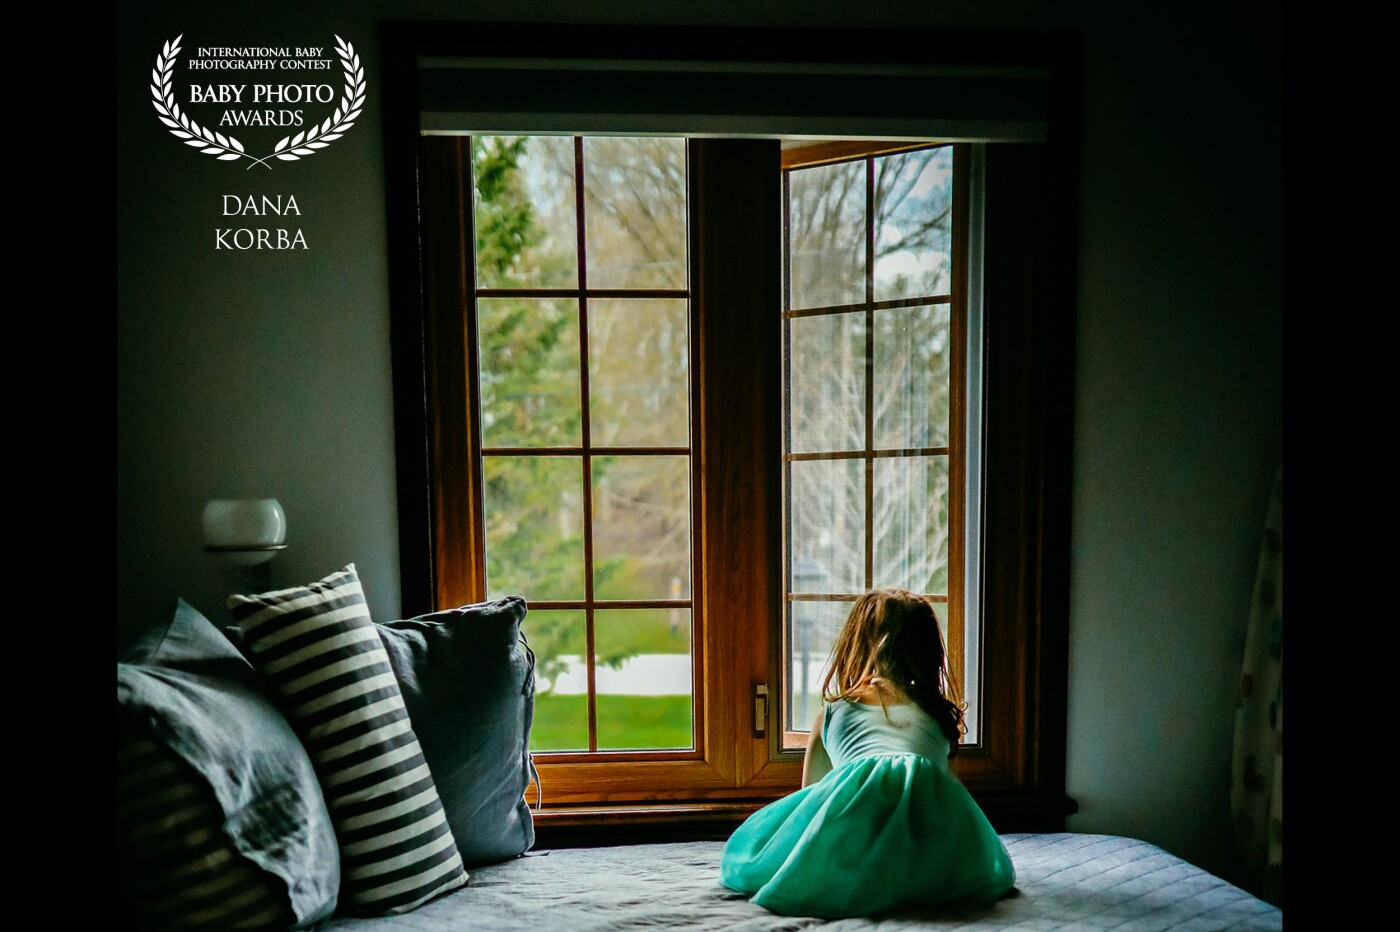 Many fairytale dreams and wishes are made from this little Princess' bed. Sweet Hunter just couldn't wait to show me her special spot at Nana's house. The lighting in this room was all natural light coming from these gorgeous windows, making this the perfect spot to capture this wonderful image.